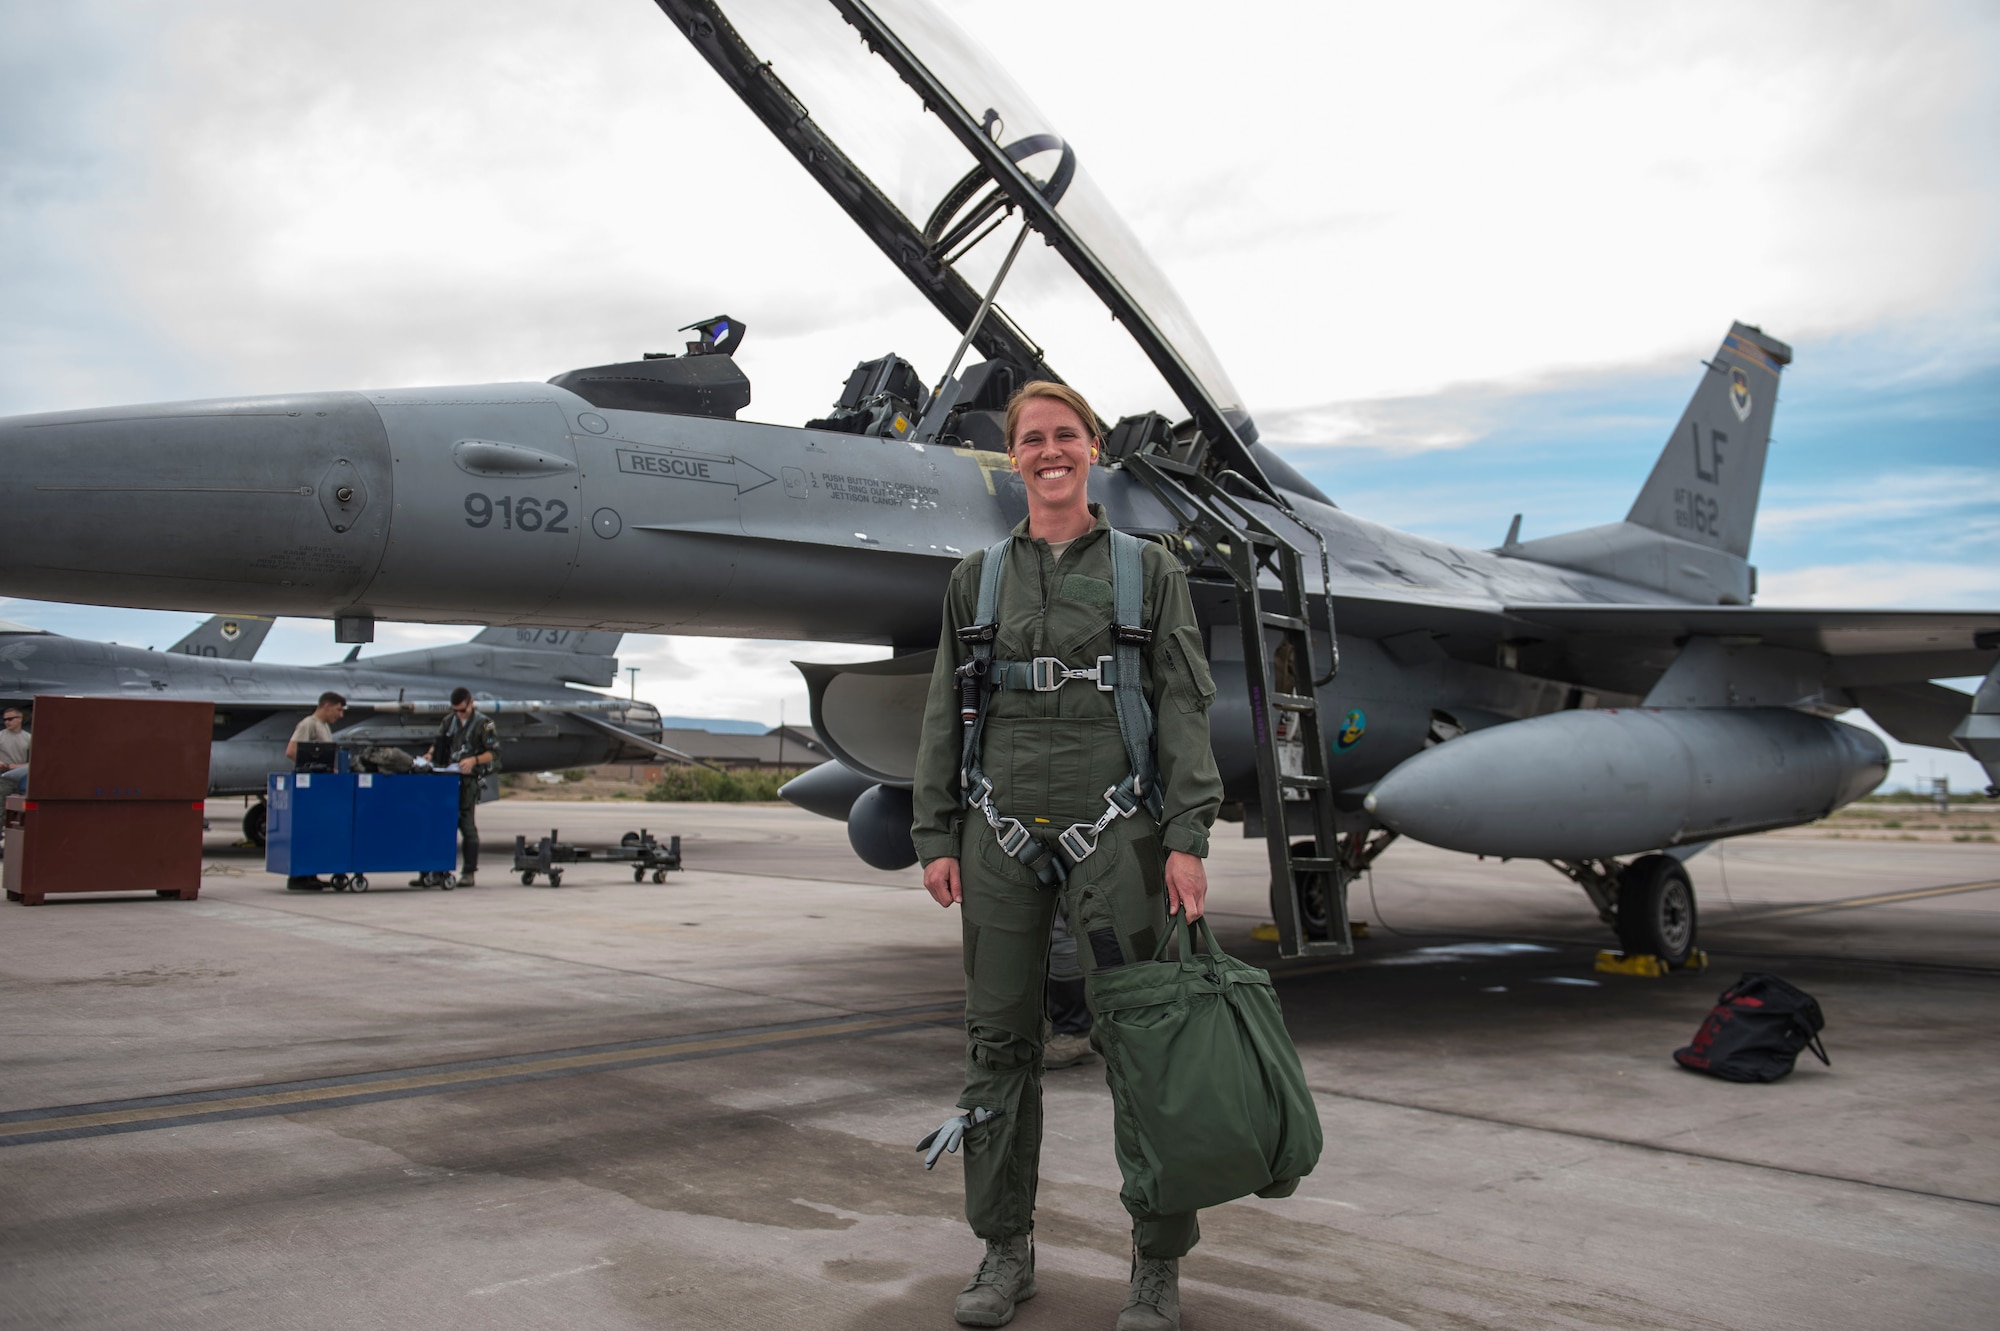 2nd Lt. Taylor O’Neil, Uniformed Services University of Health Sciences medical student, poses in front of an F-16 Fighting Falcon prior to take off at Holloman Air Force Base, N.M., July 28, 2017. Members from the 54th Fighter Group hosted USU medical students during the summer operational experience program, which is for first-year medical students transitioning to their second year of medical school. Future flight surgeon hopefuls were given familiarization flights as part of an inside look into what pilots go through in order to better provide care for pilots. (U.S. Air Force photo by Senior Airman Chase Cannon)